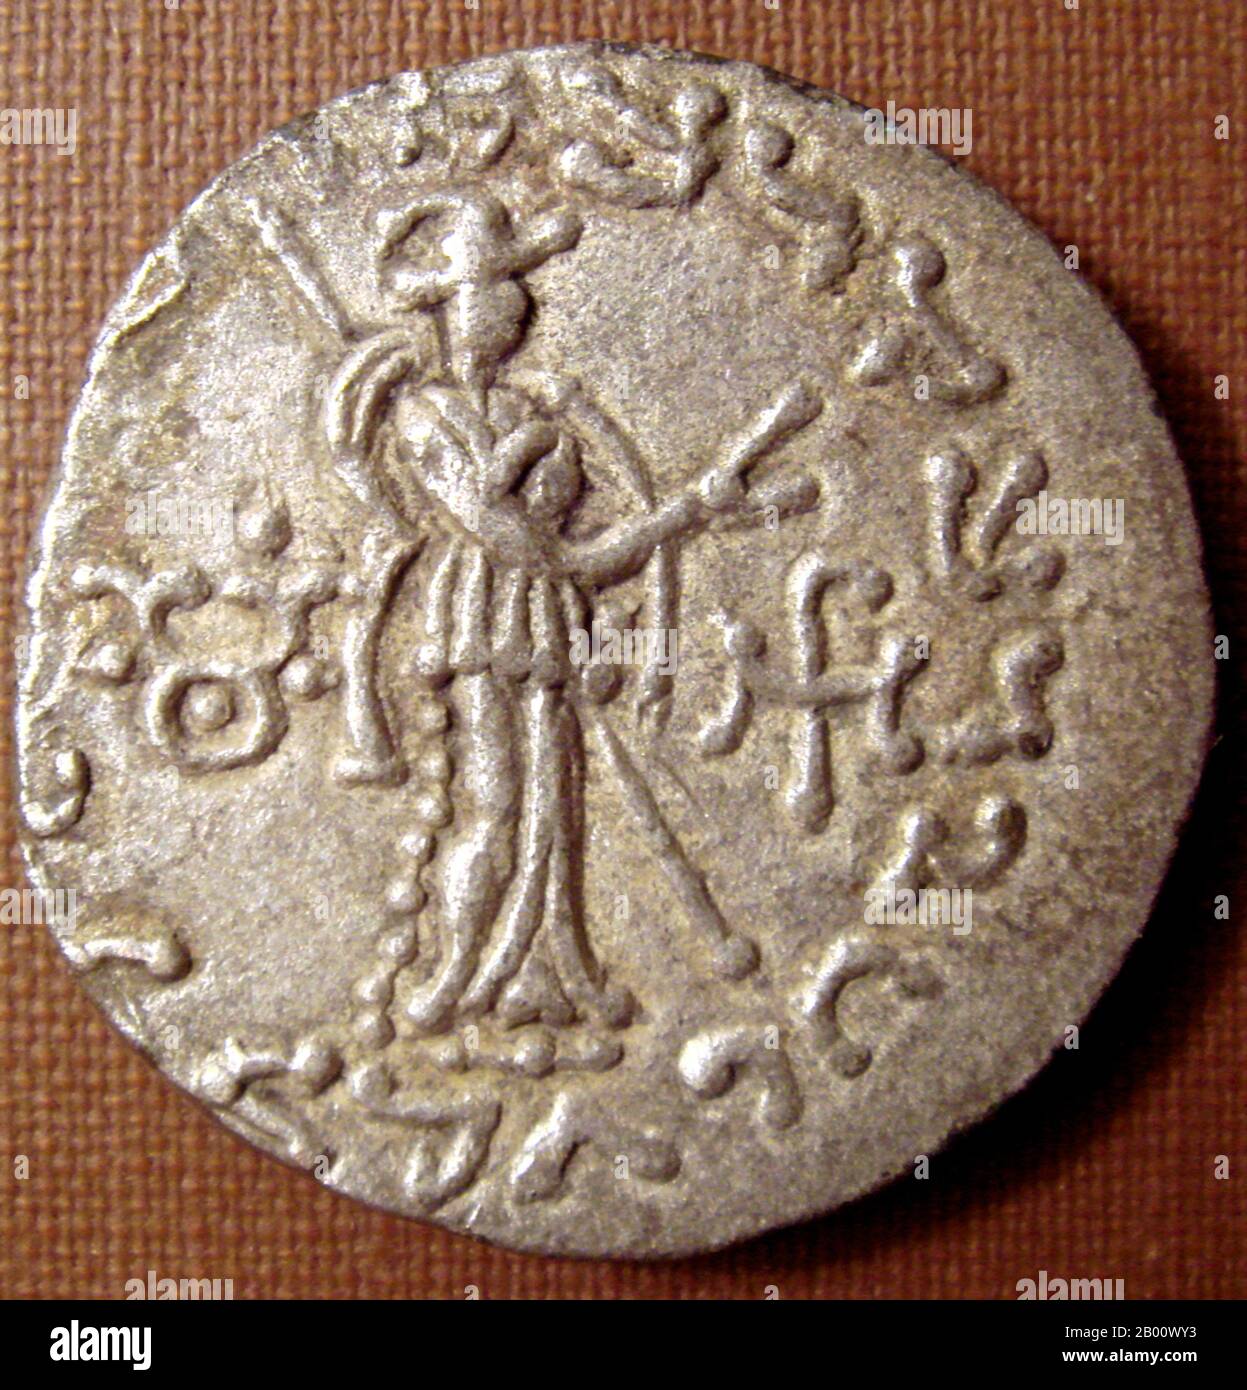 India: Silver coin of King Azes II (r.c. 35-12 BCE). Buddhist triratna symbol in the left field on the reverse.  Azes II (reigned circa 35-12 BCE), may have been the last Indo-Scythian king in northern India. After the death of Azes II, the rule of the Indo-Scythians in northwestern India finally crumbled with the conquest of the Kushans, one of the five tribes of the Yuezhi who had lived in Bactria for more than a century, and who were then expanding into India to create a Kushan Empire. Stock Photo